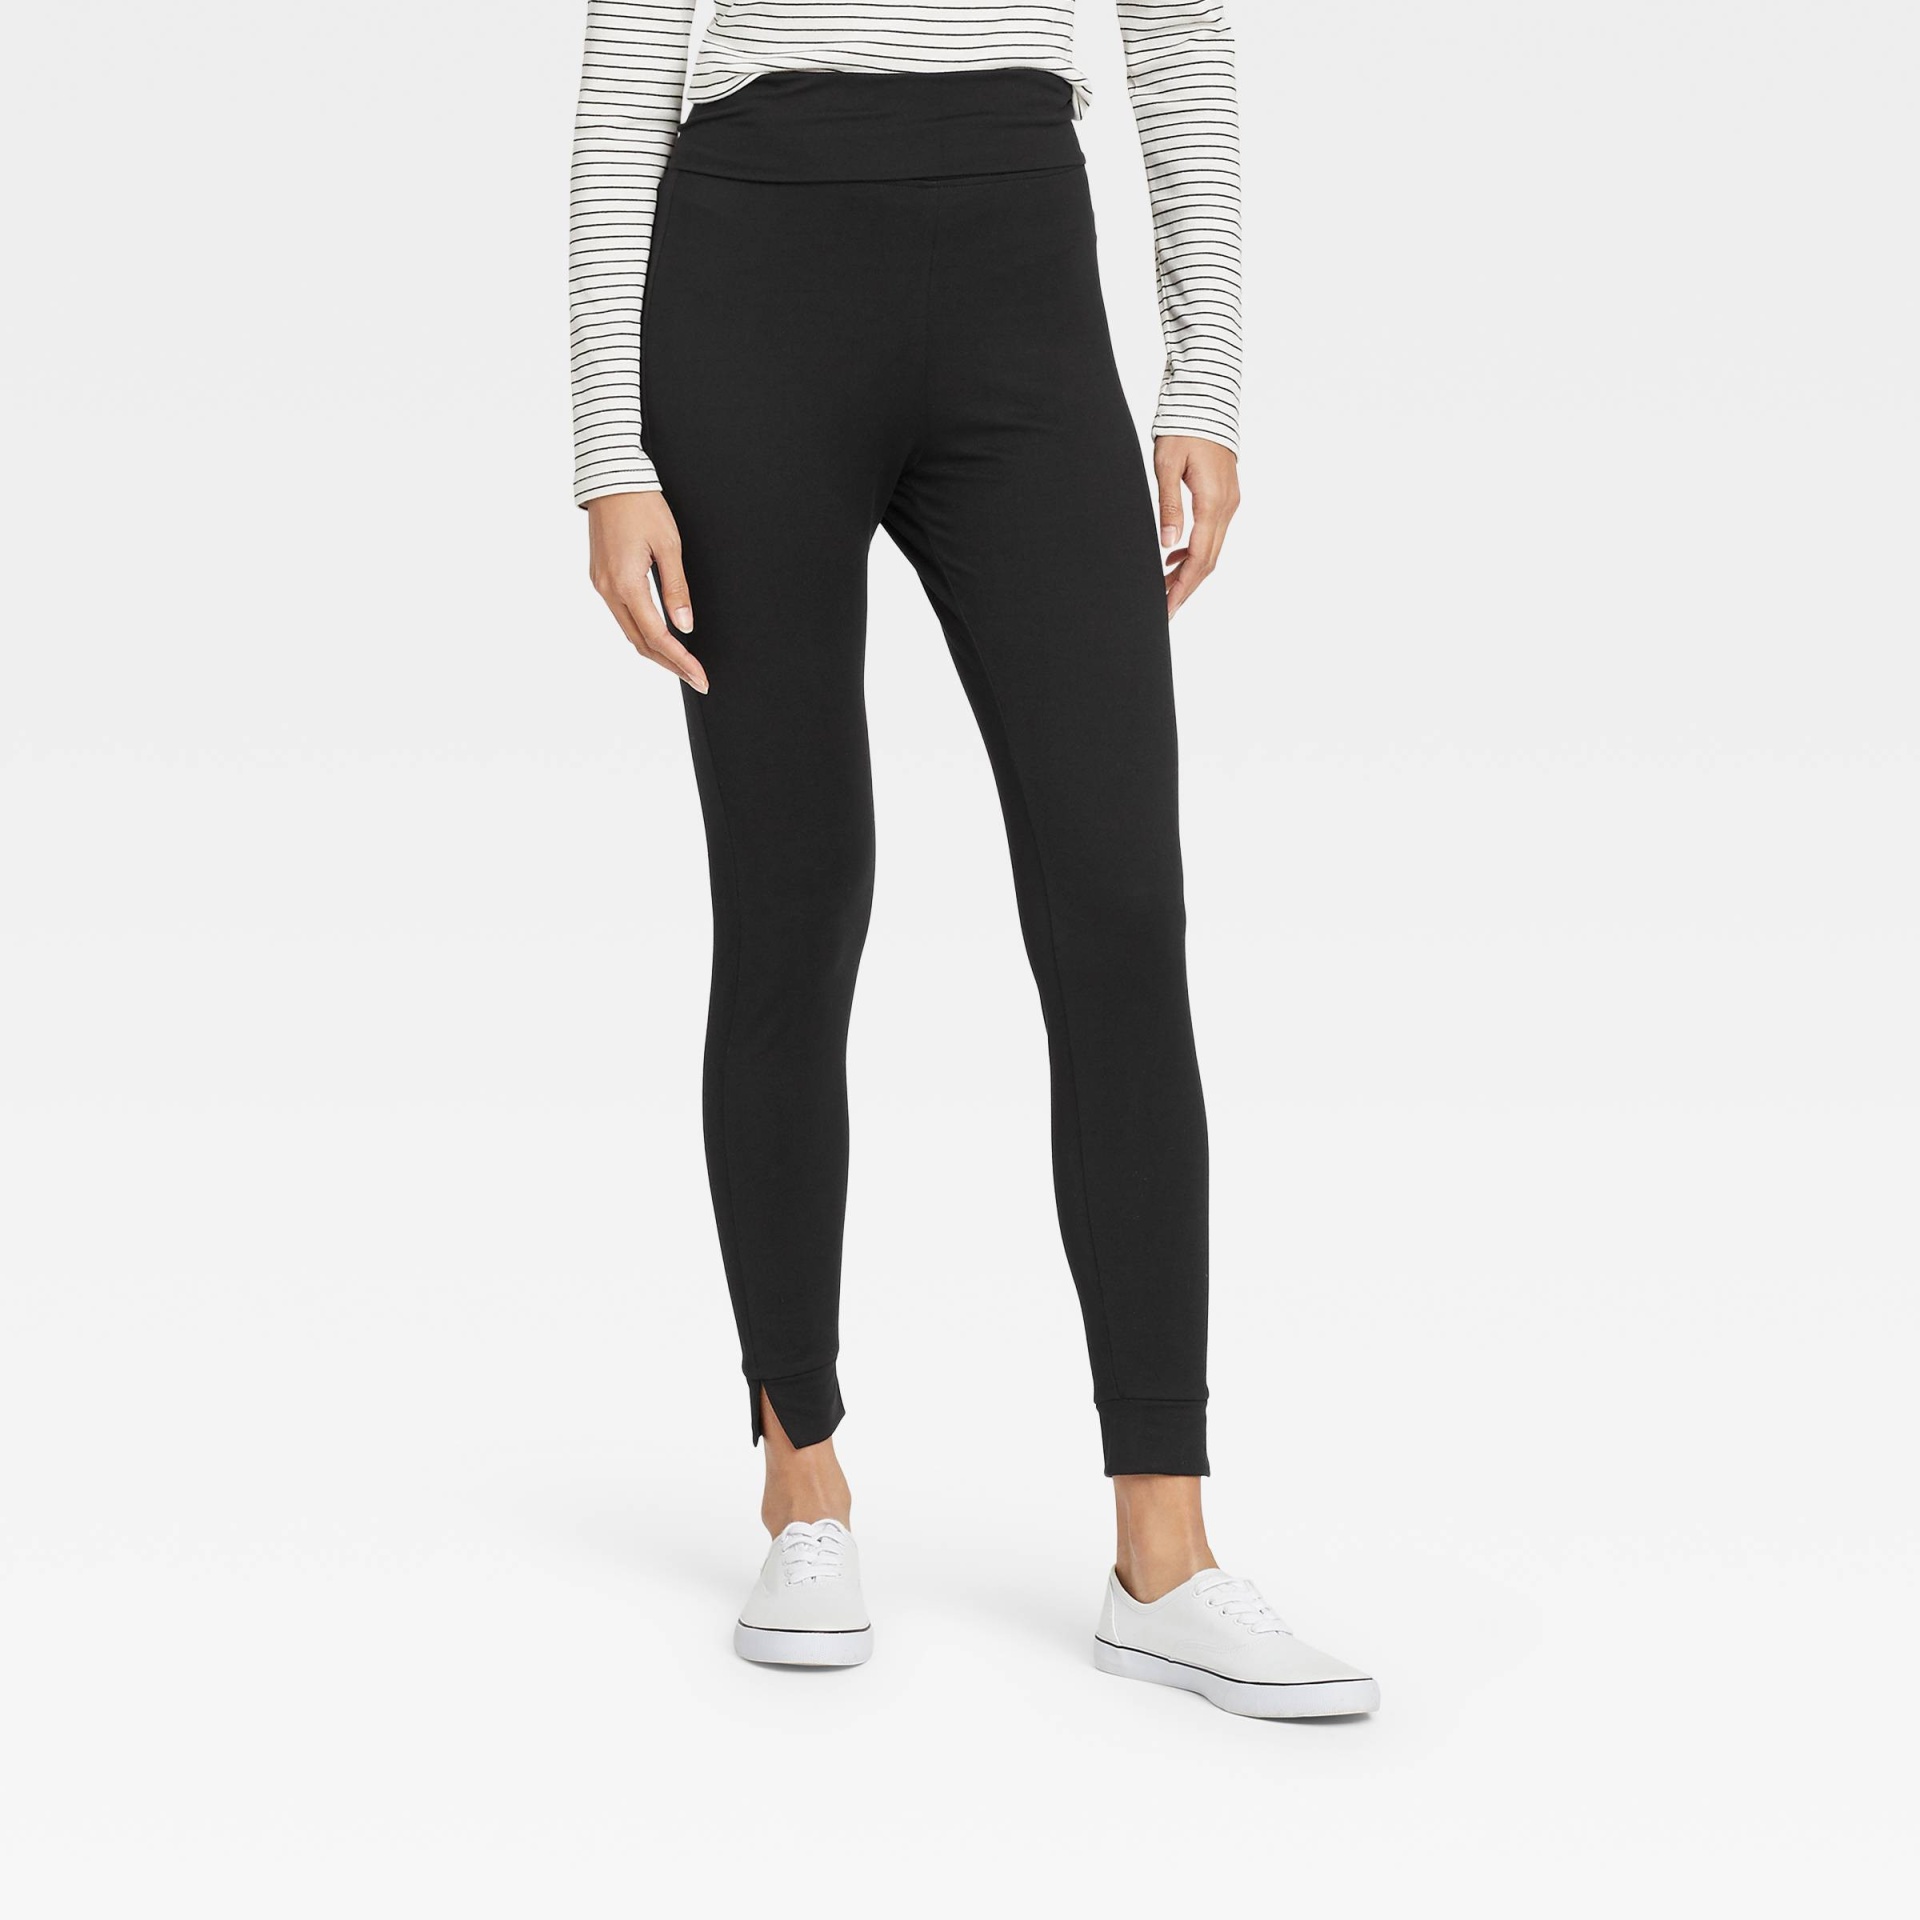 slide 1 of 3, Women's Brushed Leggings with Foldover Waistband and Split Hem Cuffs - A New Day Black L, 1 ct